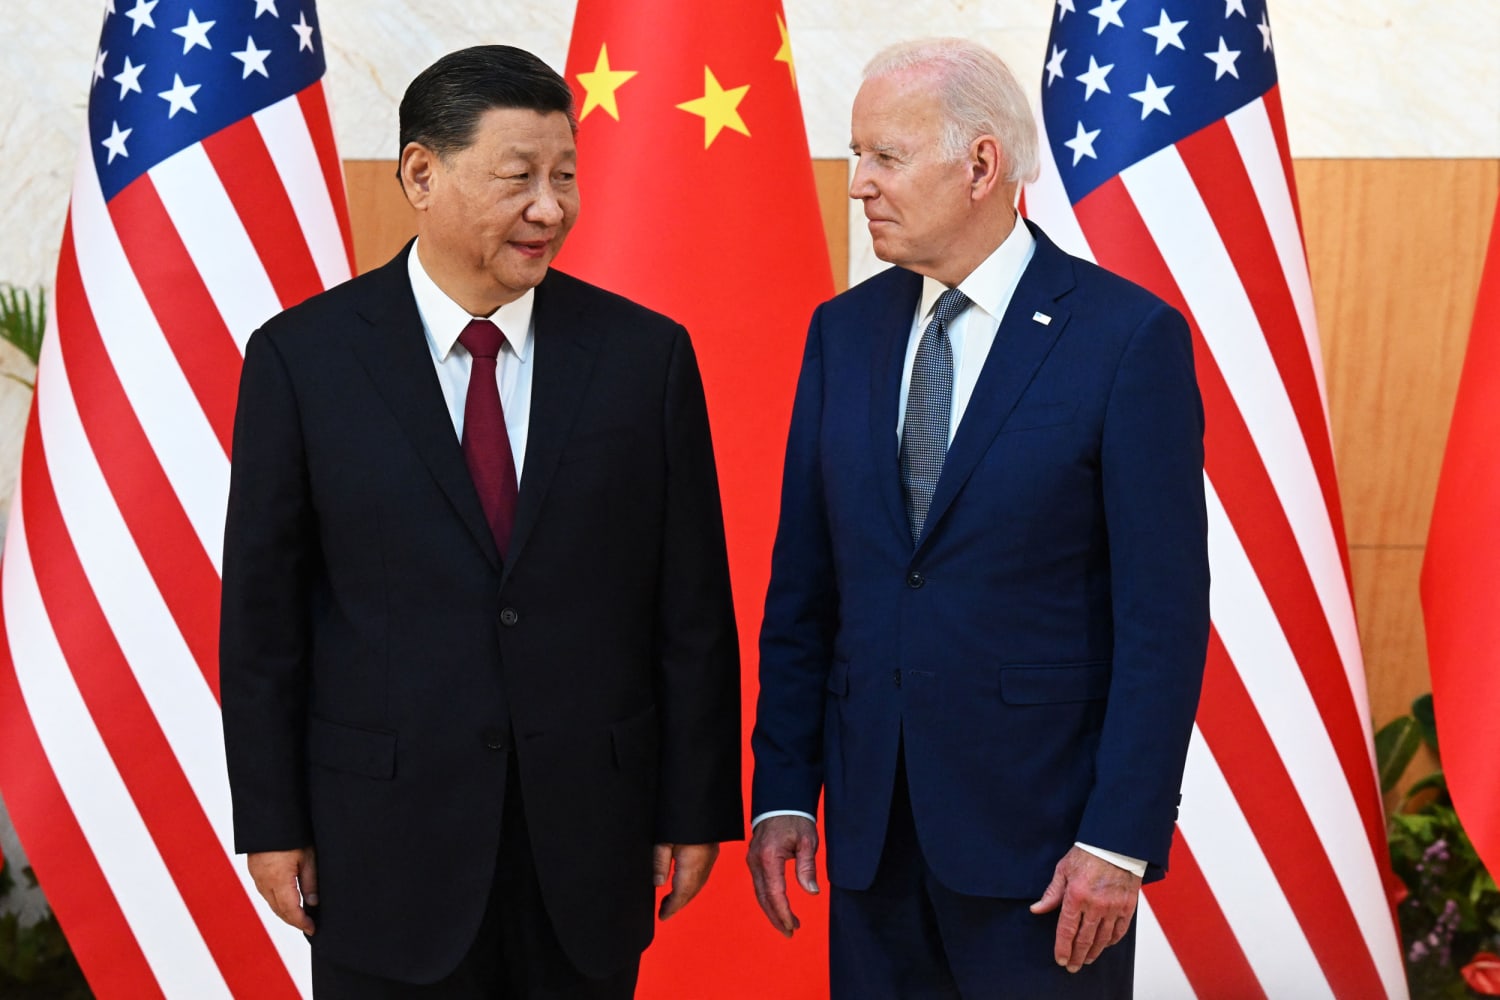 Biden’s national security adviser secretly meets China’s foreign minister in bid to ease strained ties